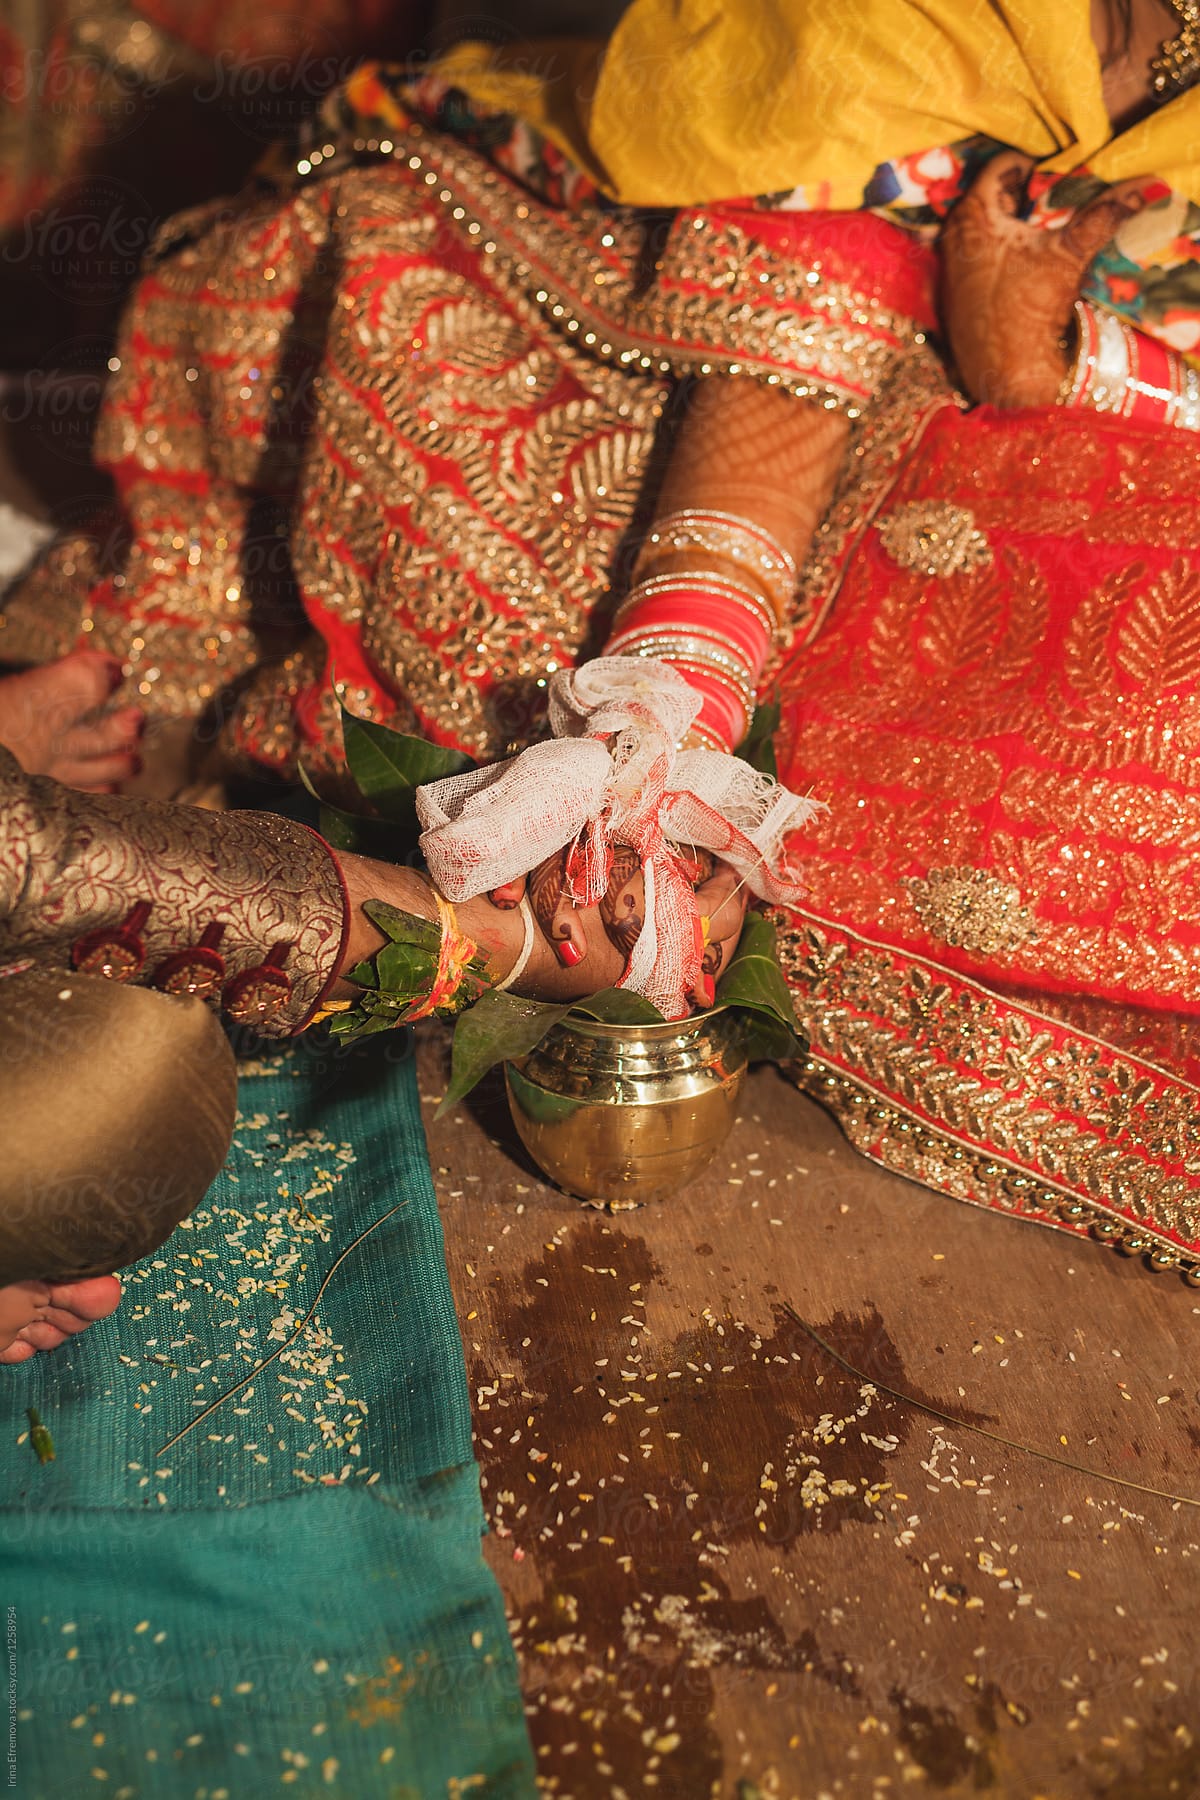 Detail shot of hands at an Indian wedding ceremony